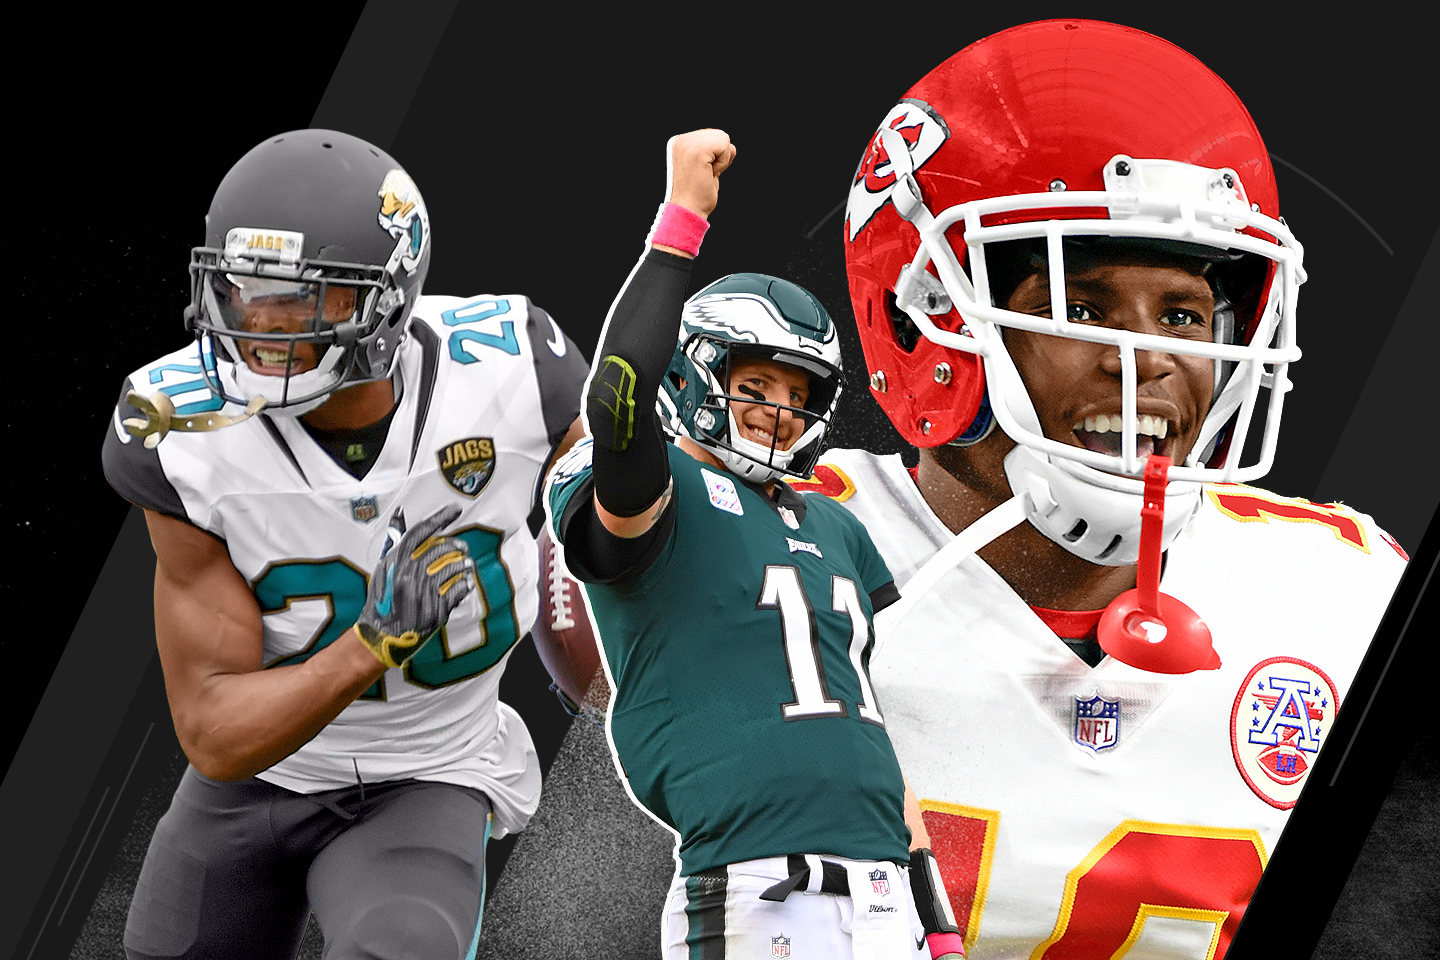 NFL Power Rankings: Chiefs and Eagles take top spots, Jets soar